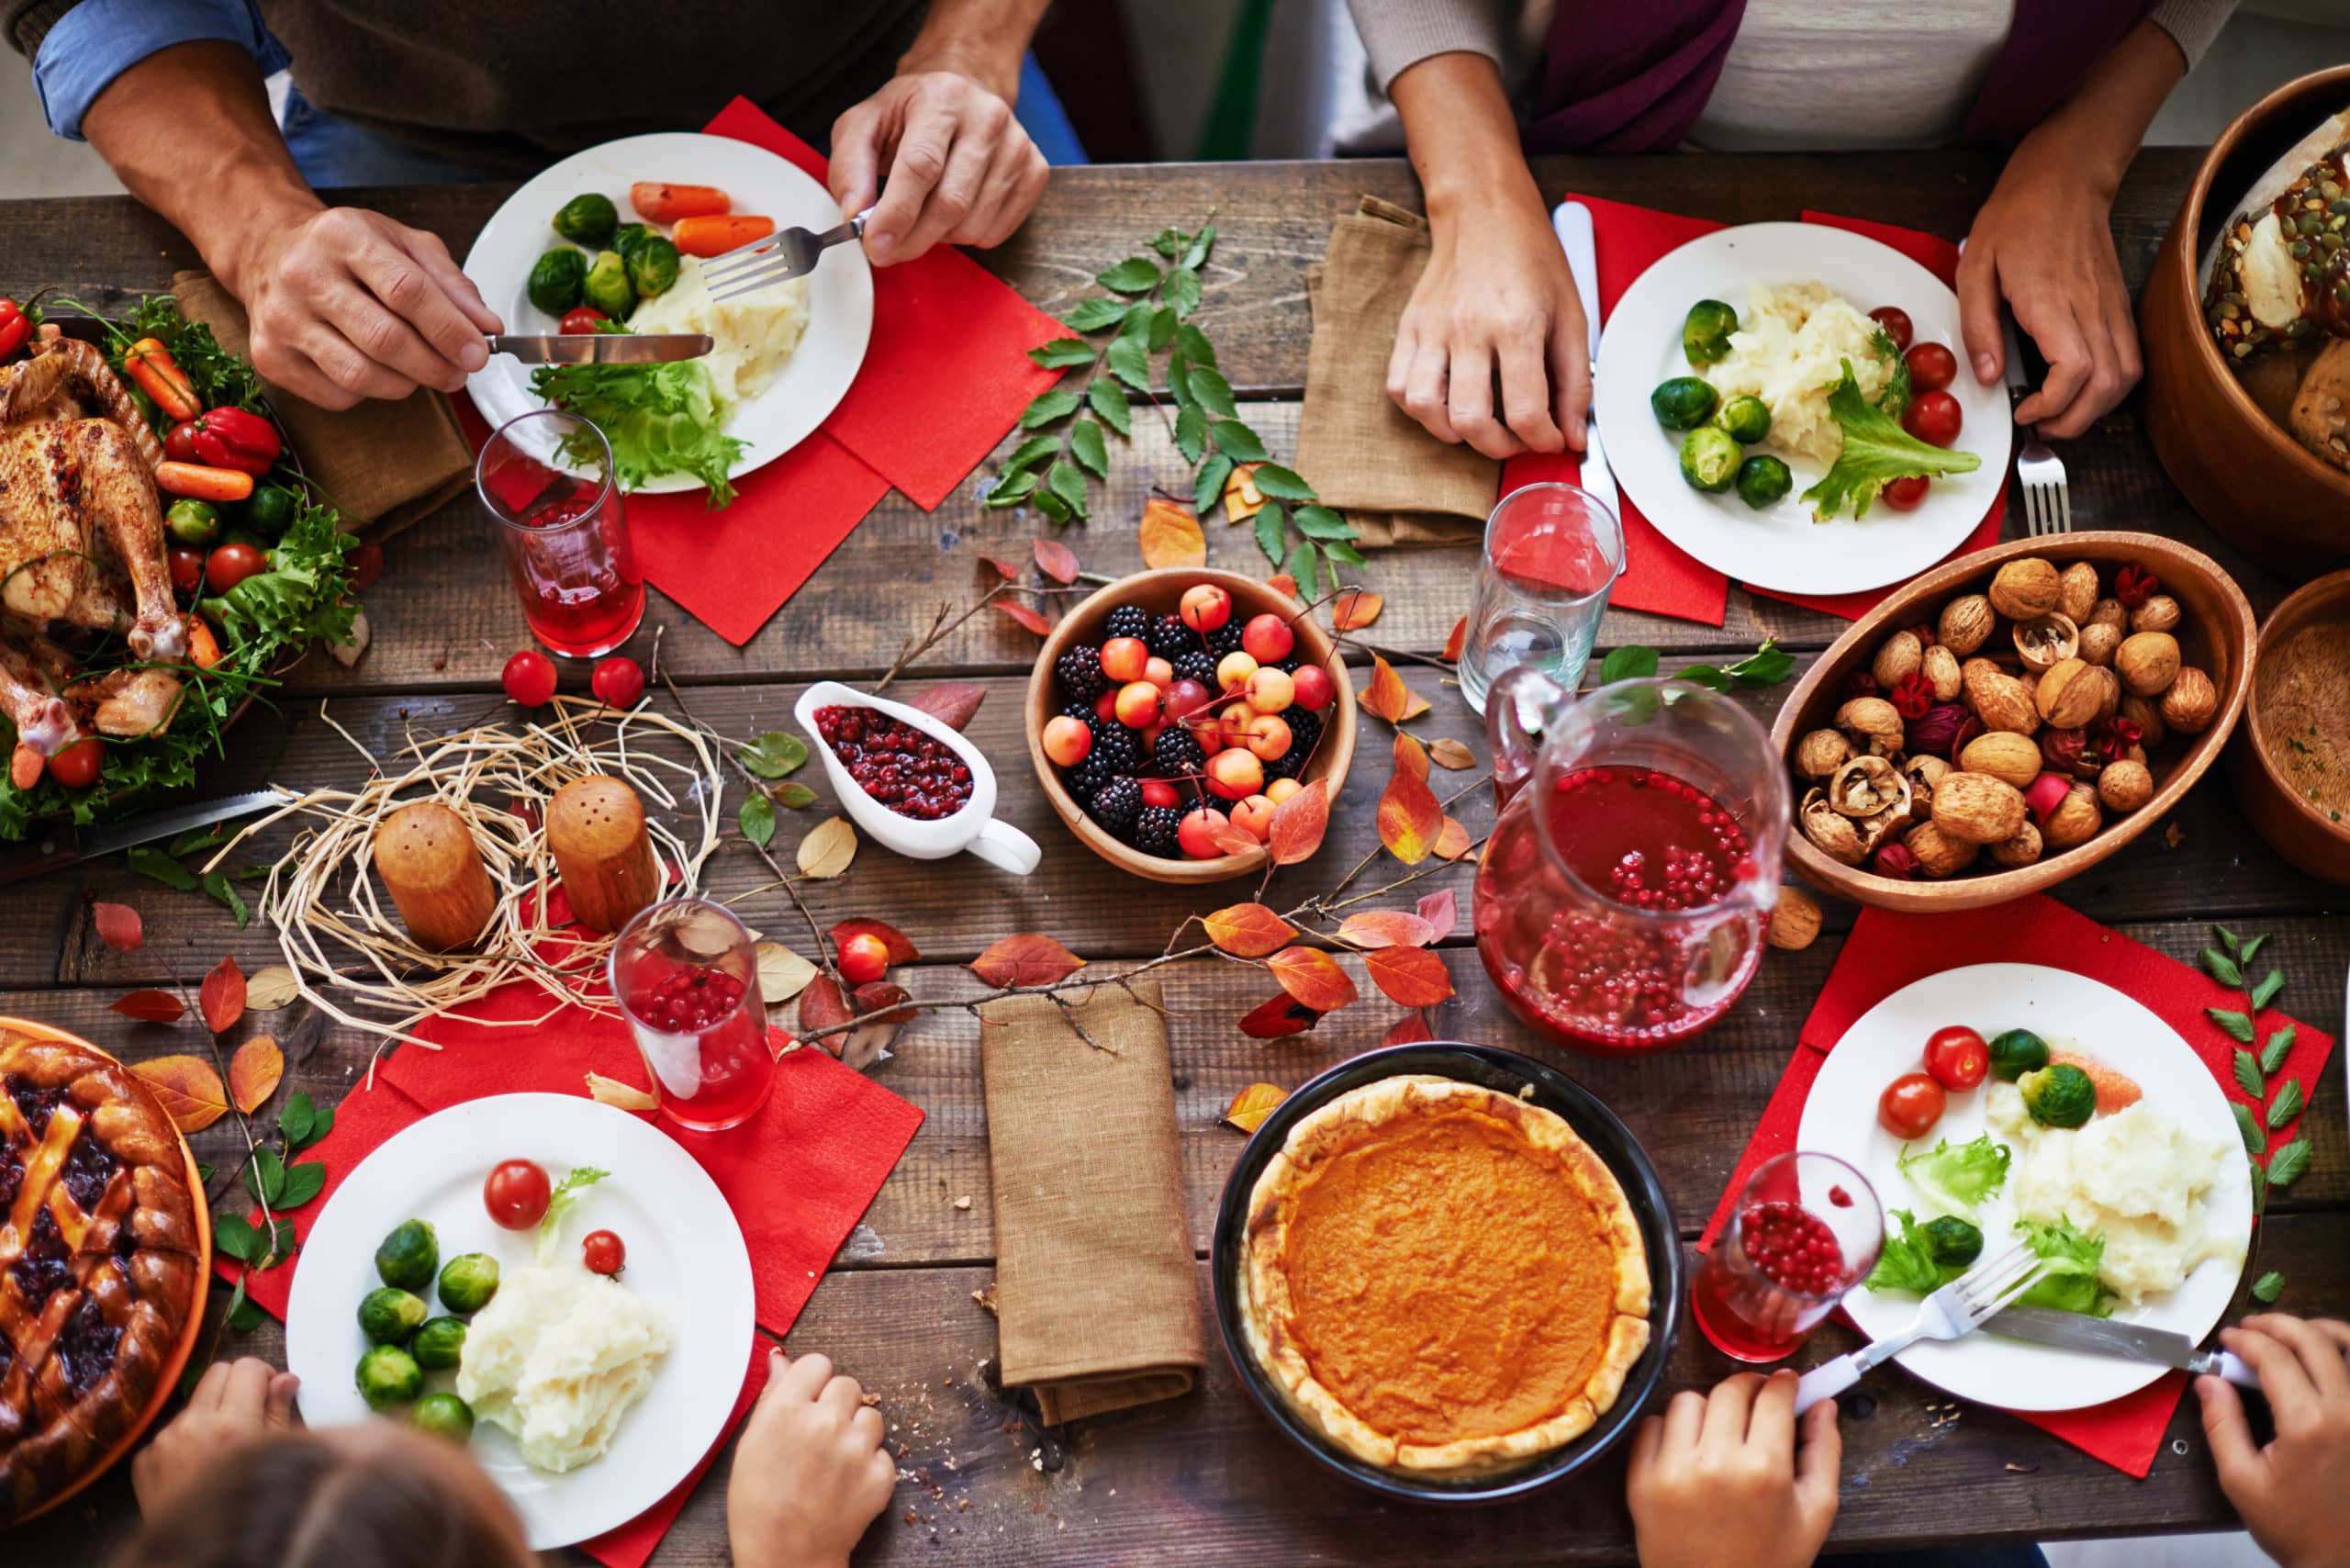 Six tips for a healthier Thanksgiving